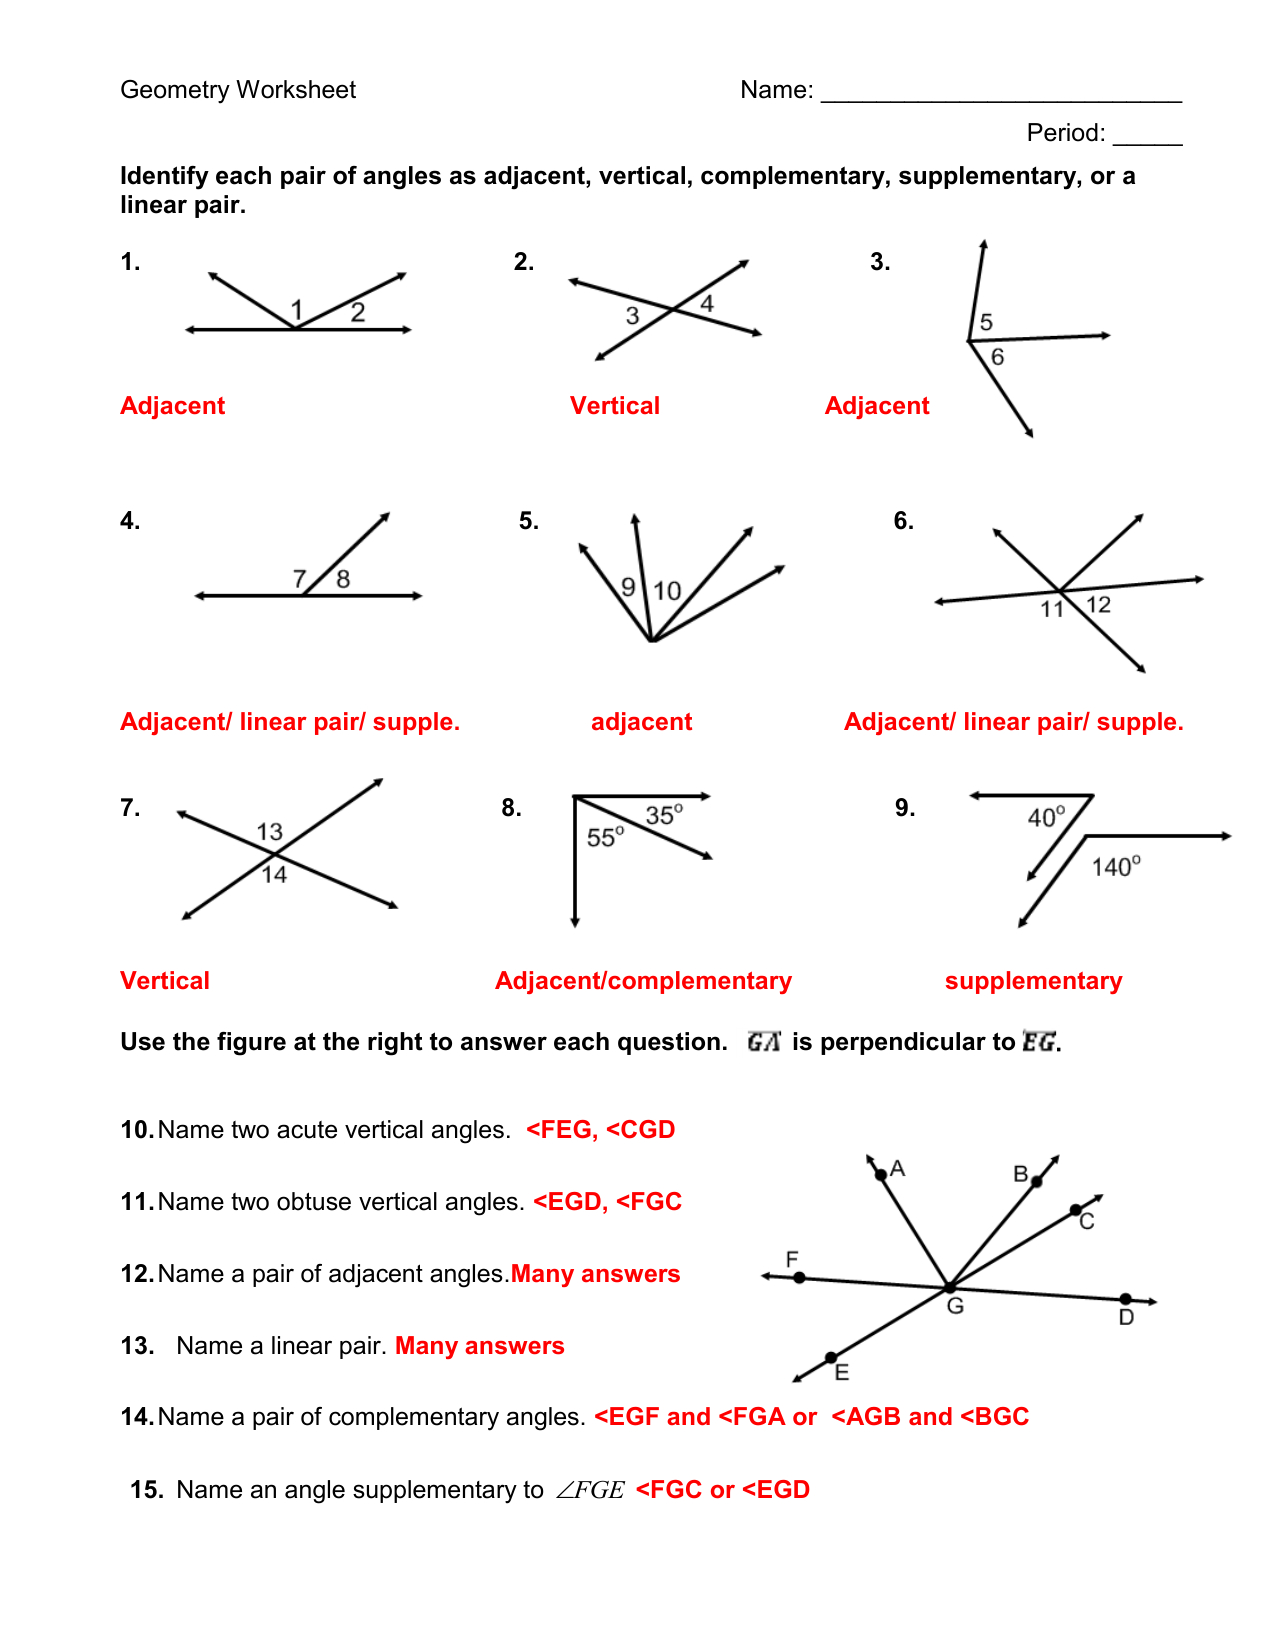 angle-of-impact-practice-worksheet-answers-angleworksheets